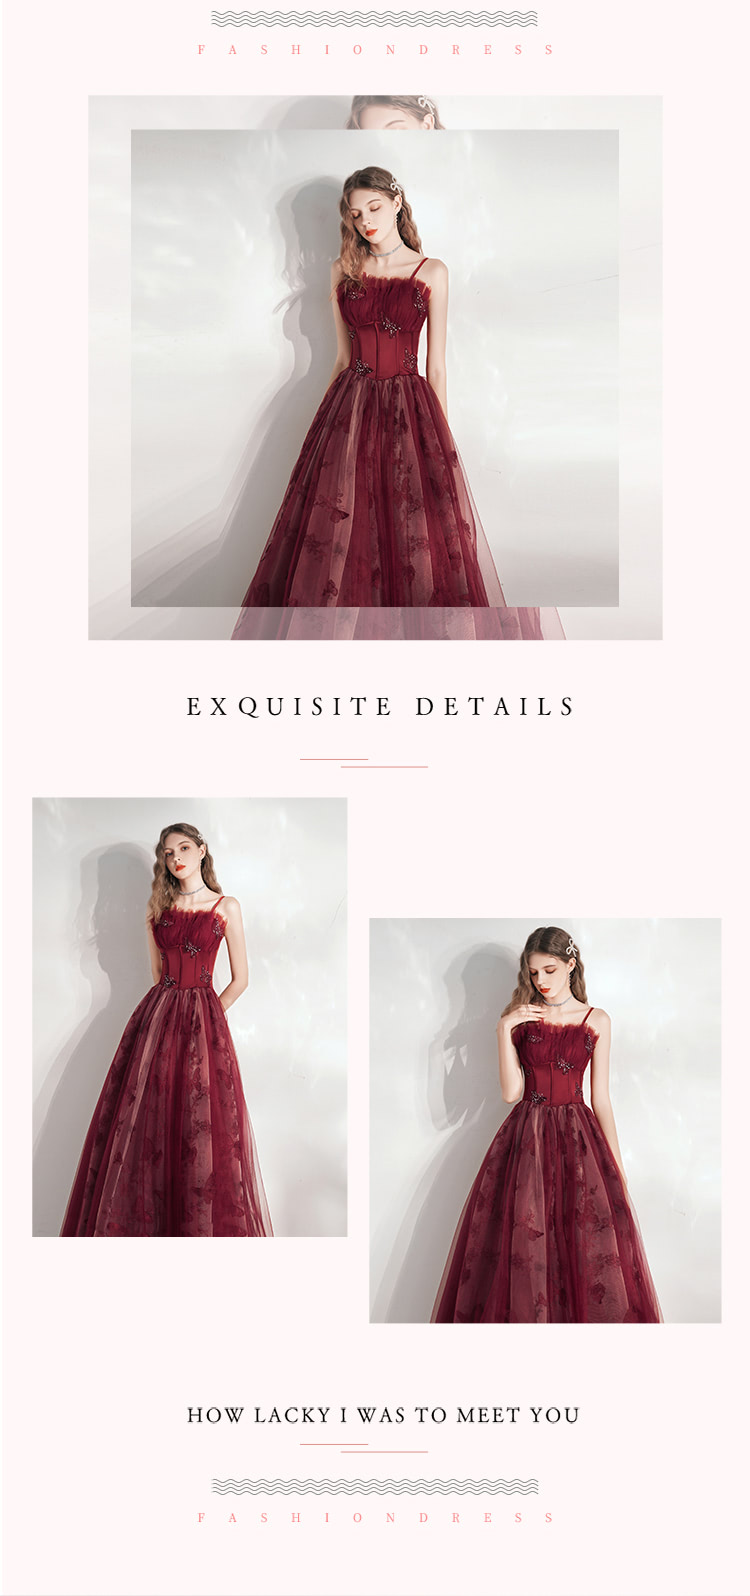 Unique-Wine-Red-Maxi-Prom-Dress-Formal-Party-Evening-Gown10.jpg